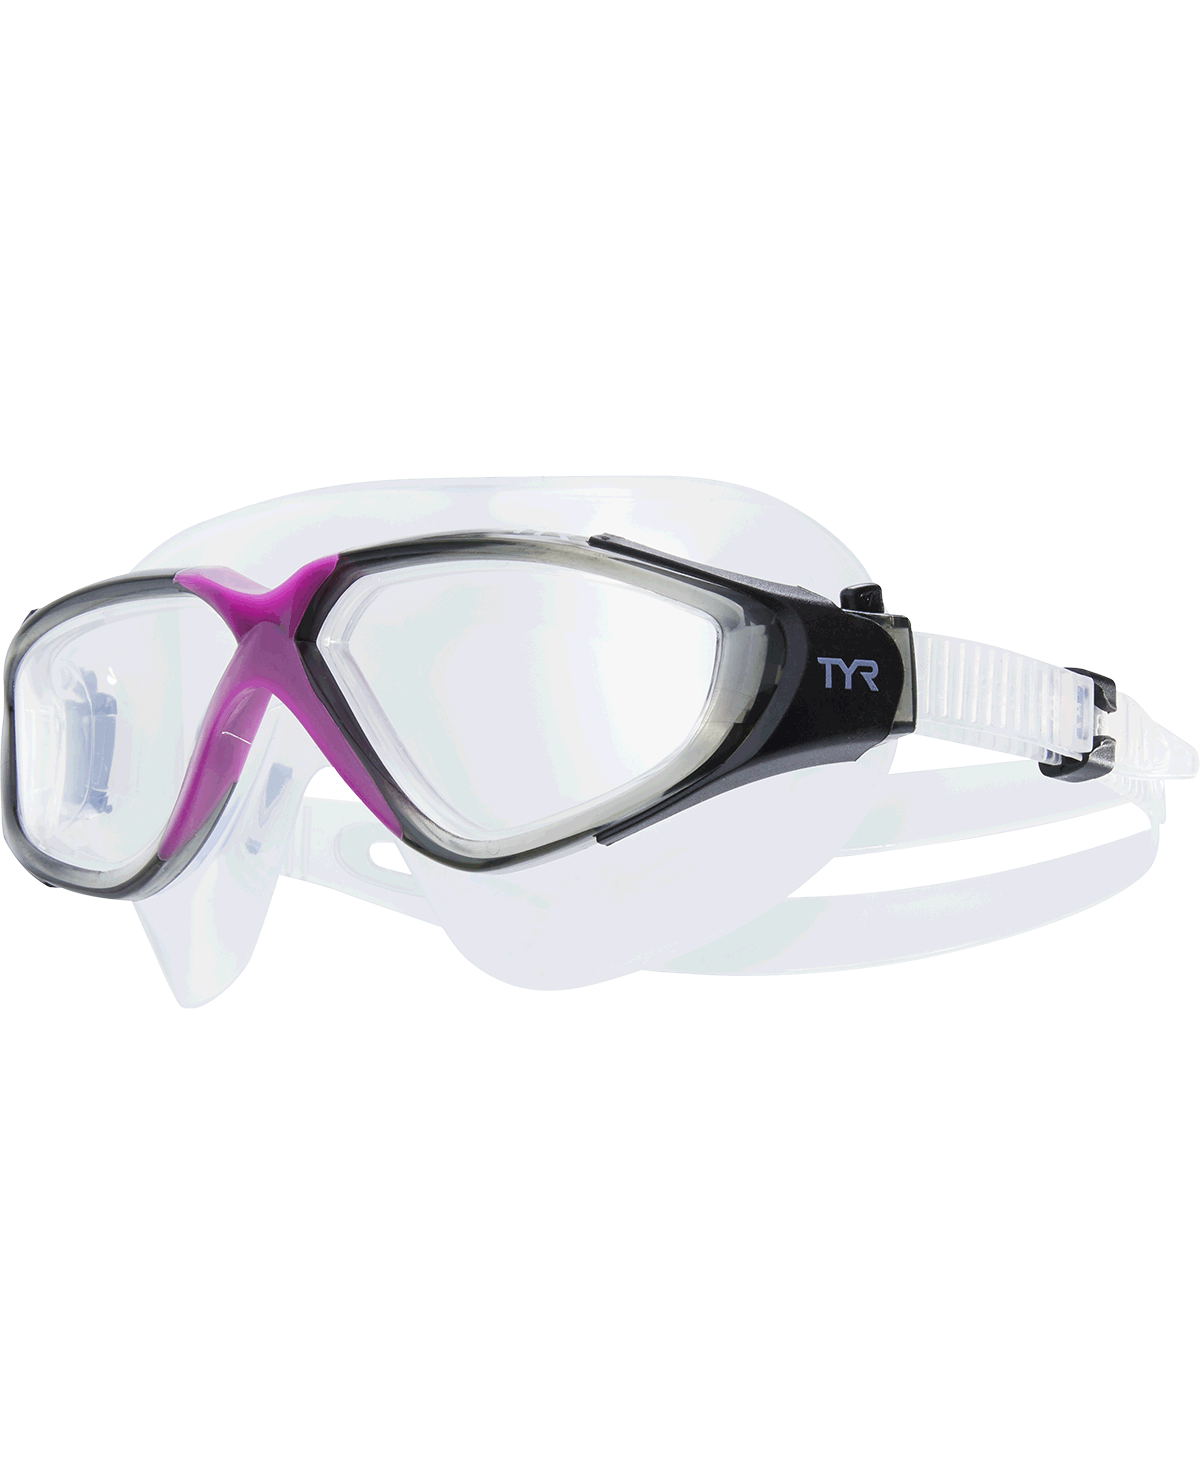 Goggle | Products | GH Sports